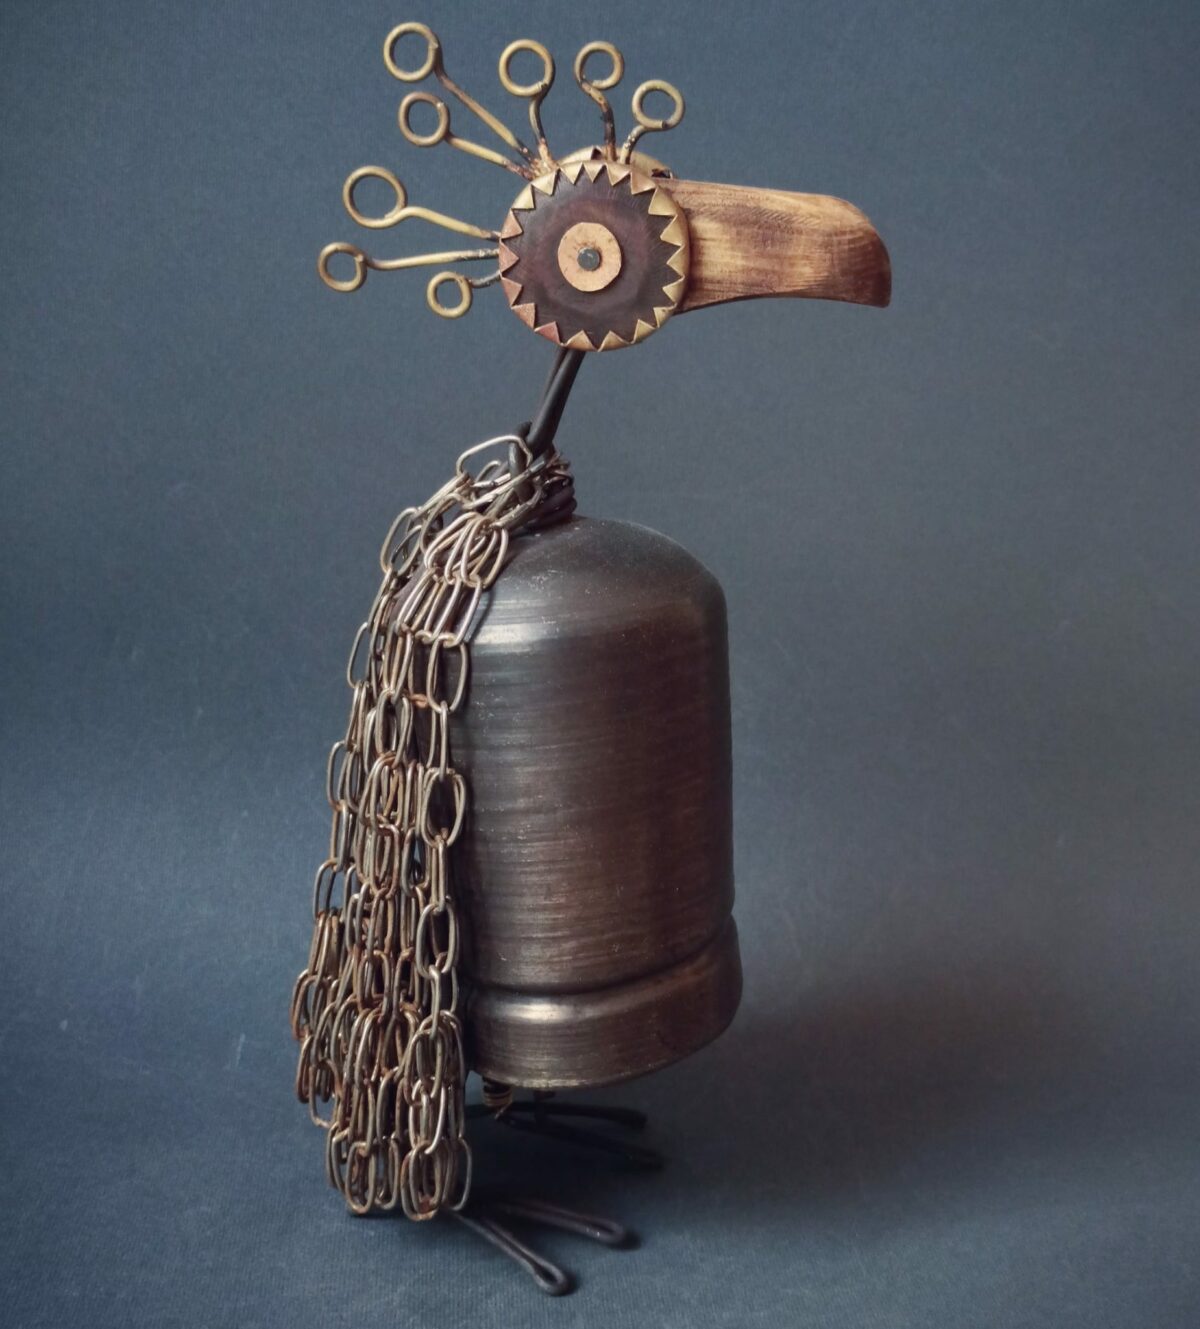 Animal Like Quirky Creatures Made From Discarded Objects And Materials By Mohsen Heydari Yeganeh (4)